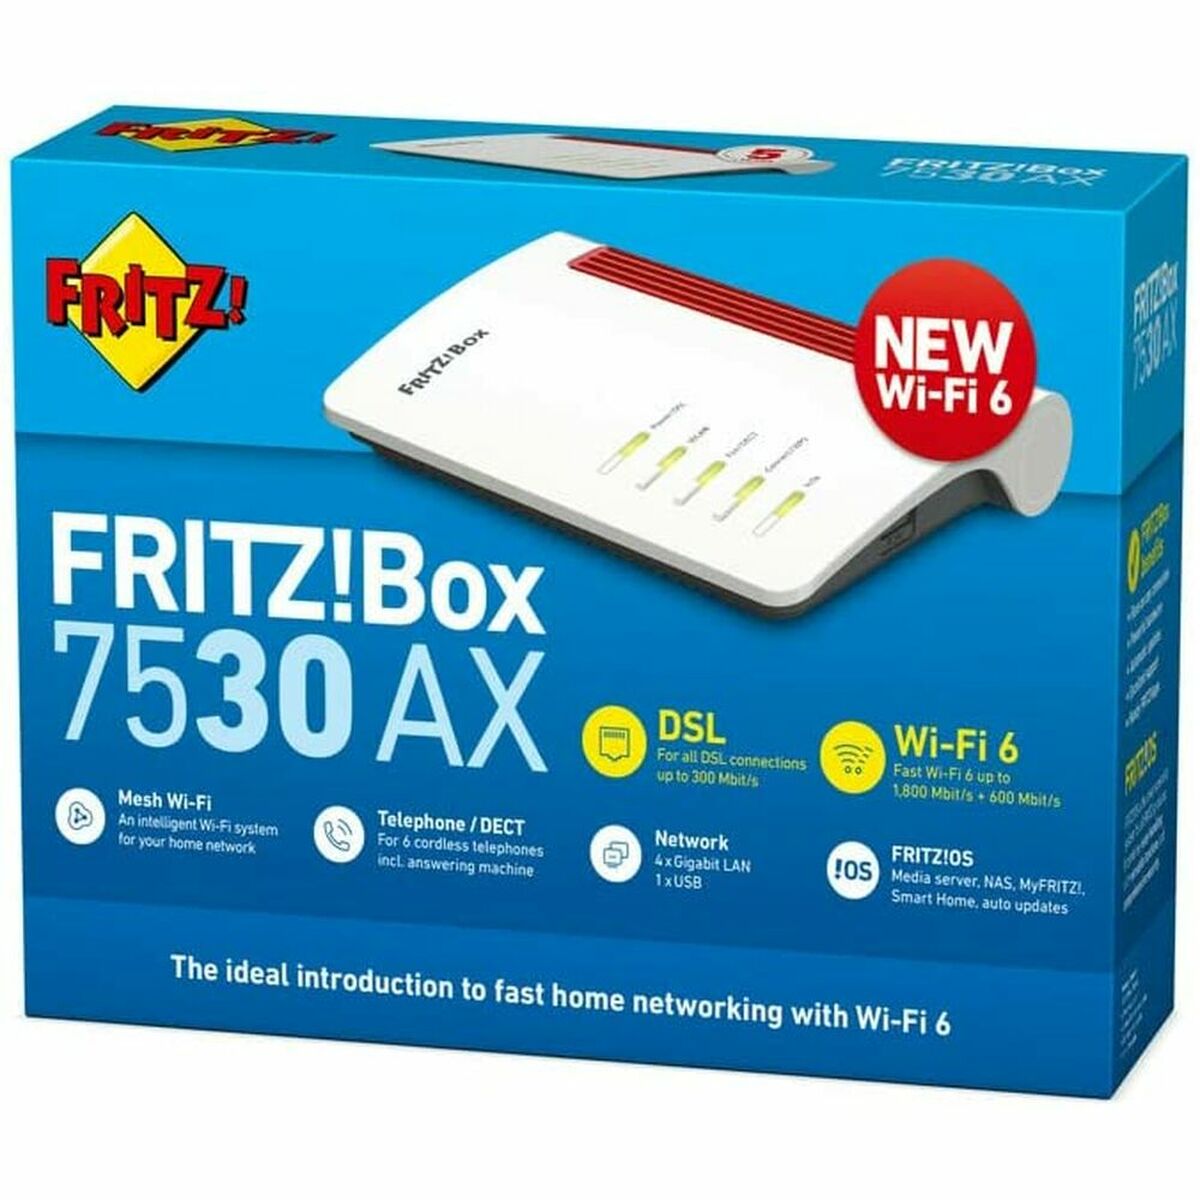 Router Fritz! 20002944 300 Mbps, Fritz!, Computing, Network devices, router-fritz-20002944-300-mbps, Brand_Fritz!, category-reference-2609, category-reference-2803, category-reference-2826, category-reference-t-19685, category-reference-t-19914, Condition_NEW, networks/wiring, Price_200 - 300, Teleworking, RiotNook